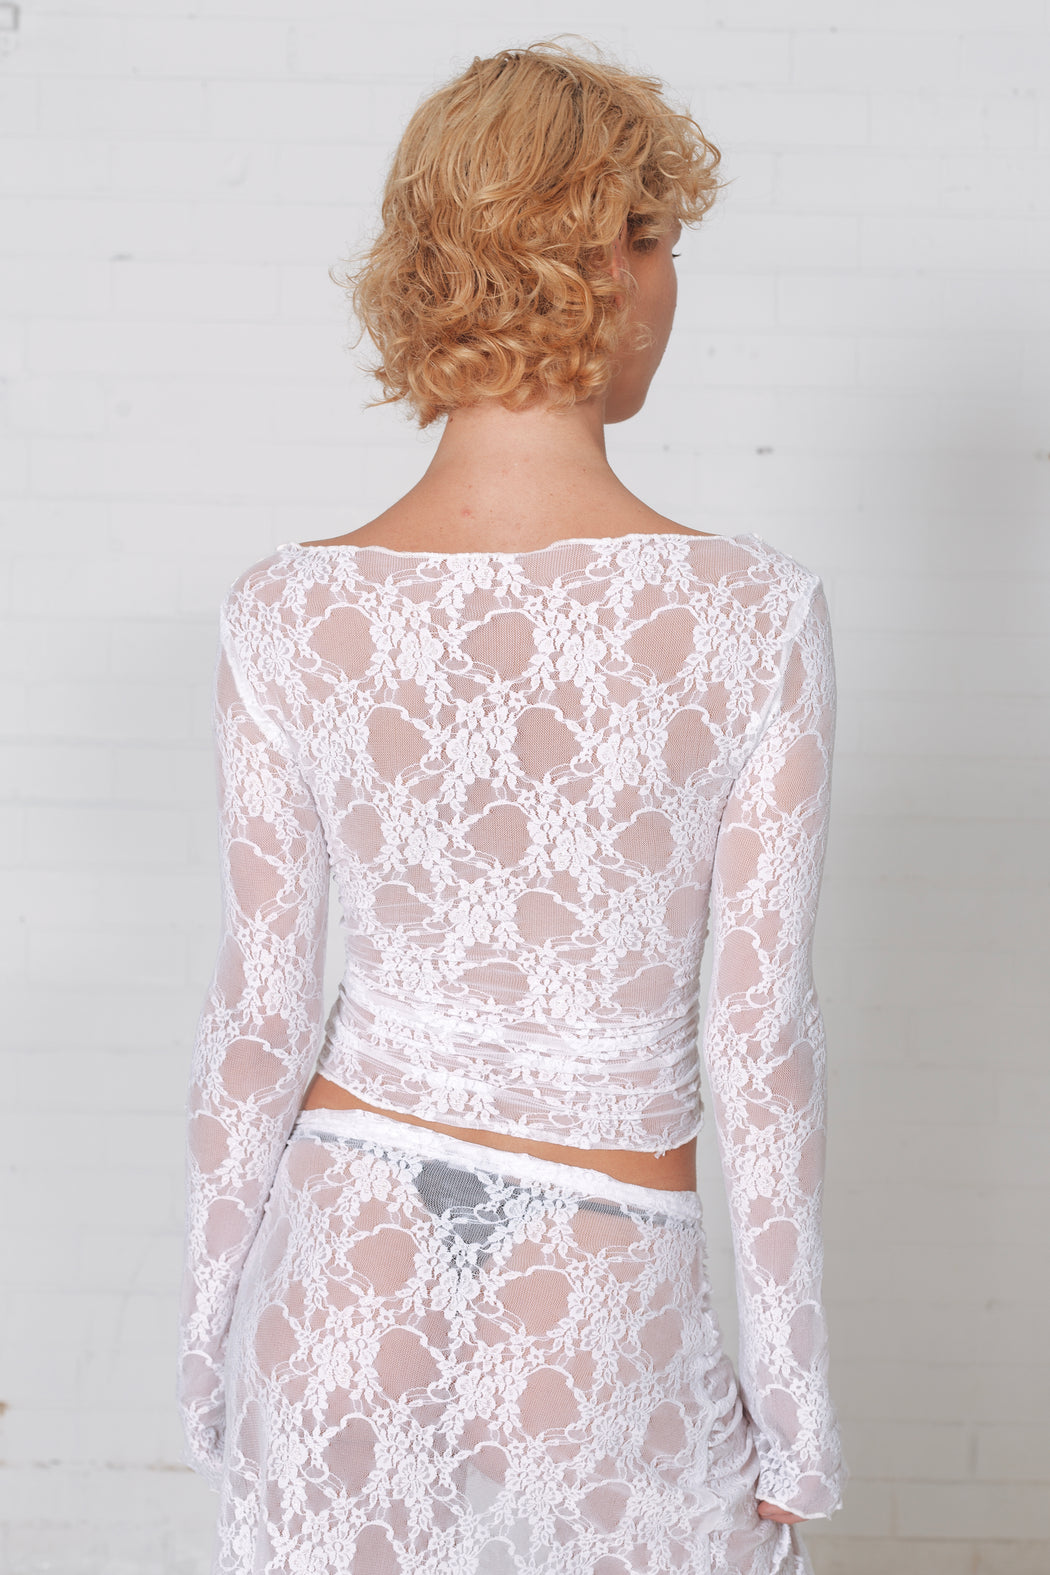 WHITE LACE TIE TOP LONG SLEEVE